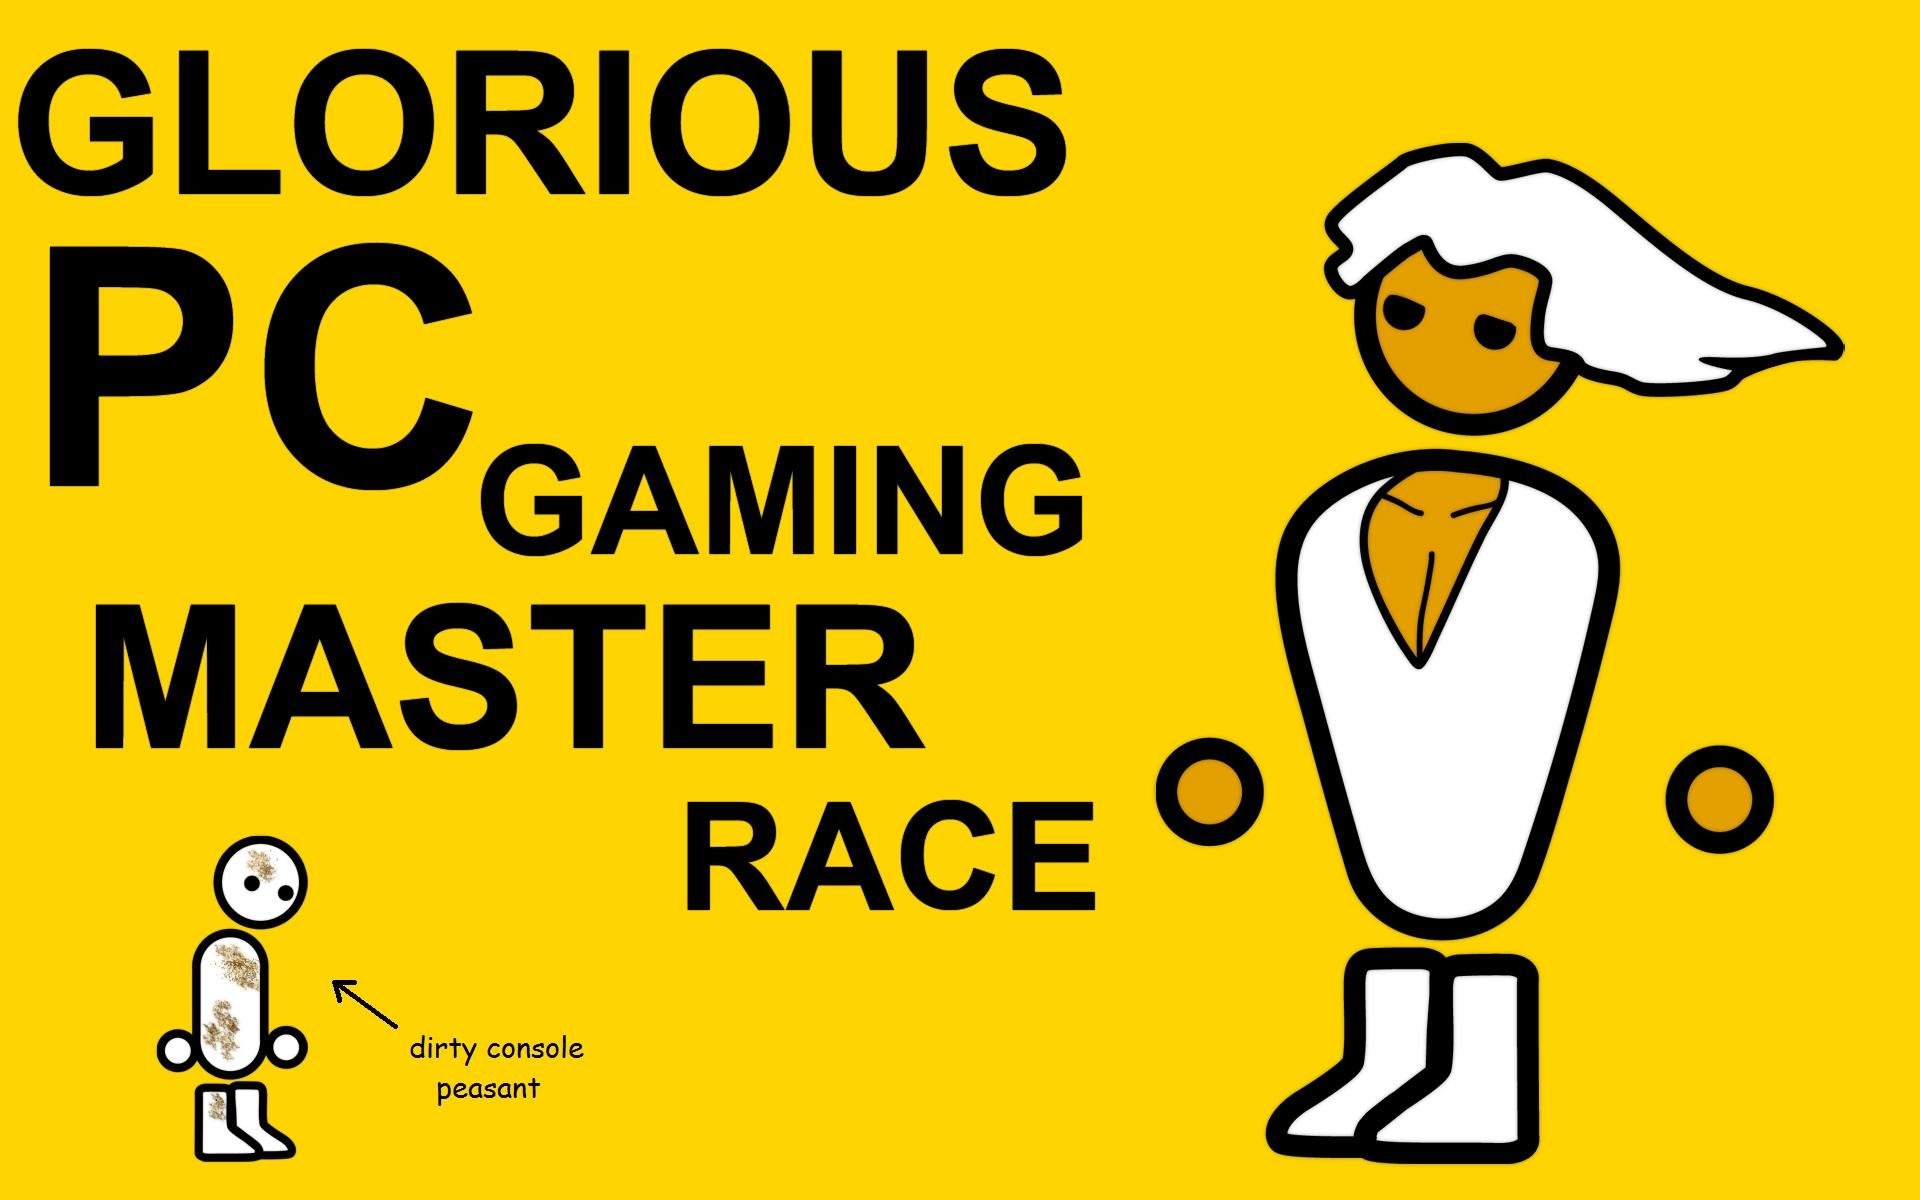 General 1920x1200 PC gaming consoles Master Race PC Master  Race humor yellow background typography simple background digital art